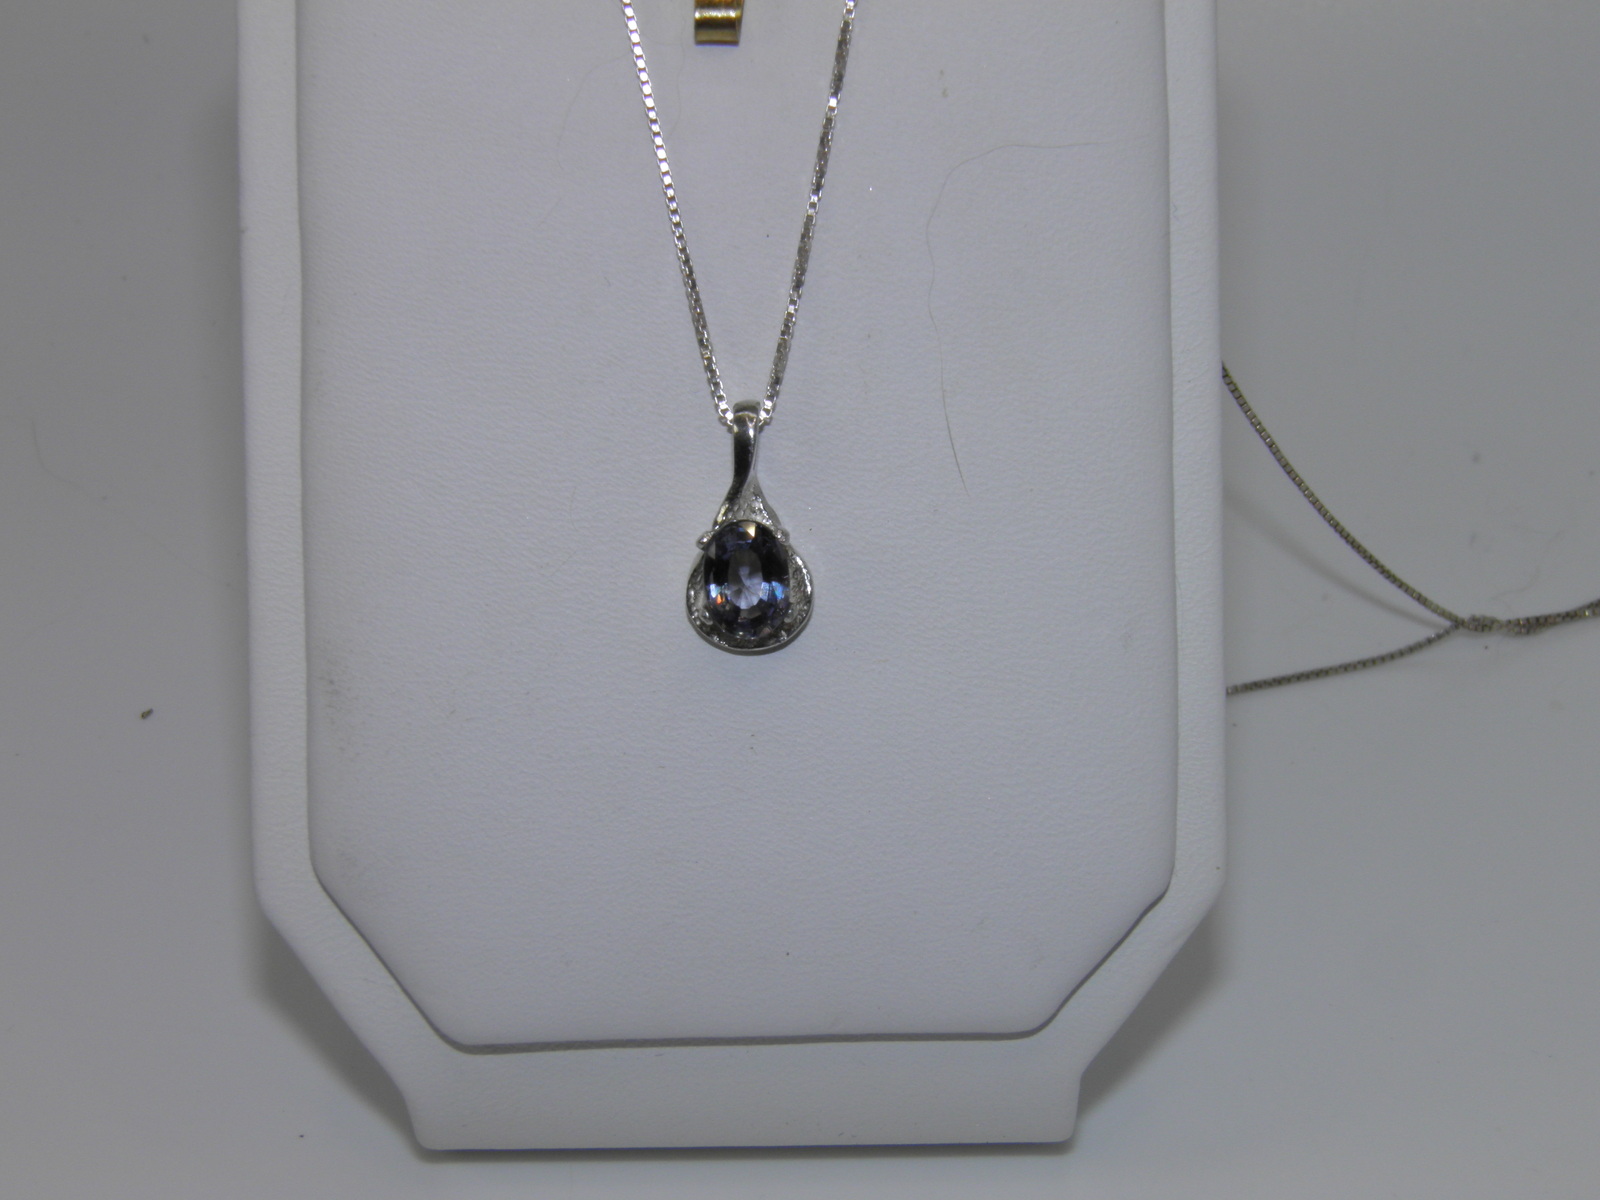 New 1.02ct Oval Natural Purple Spinel with Certificate Sterling Silver pendant - $215.00